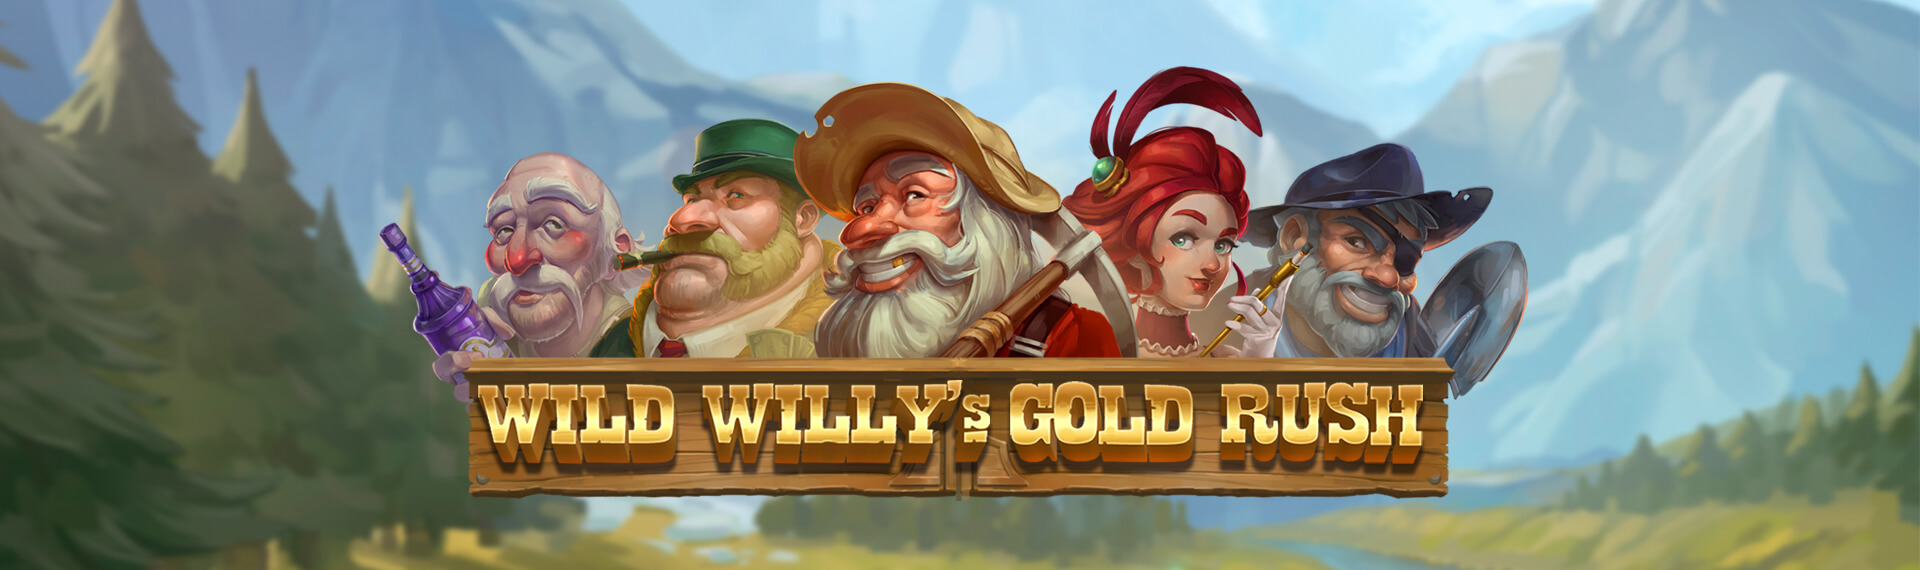 Wild Willy’s Gold Rush Screenshot <br />
<b>Notice</b>:  Undefined variable: key in <b>/var/www/html/wp-content/themes/armadillo/page-game.php</b> on line <b>37</b><br />
1